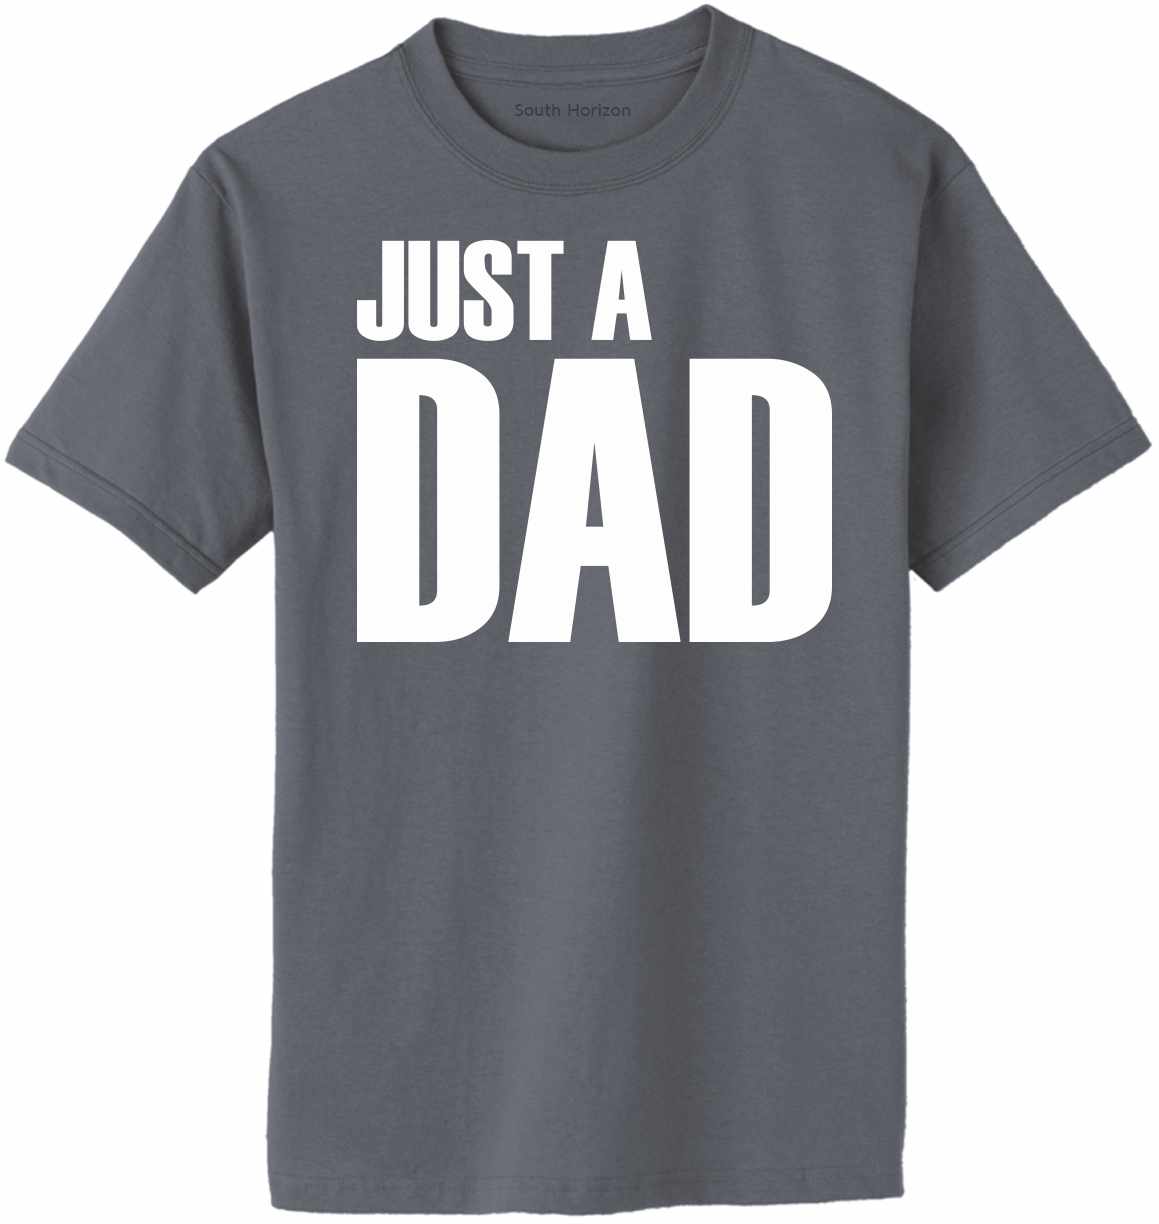 Just A Dad on Adult T-Shirt (#1296-1)